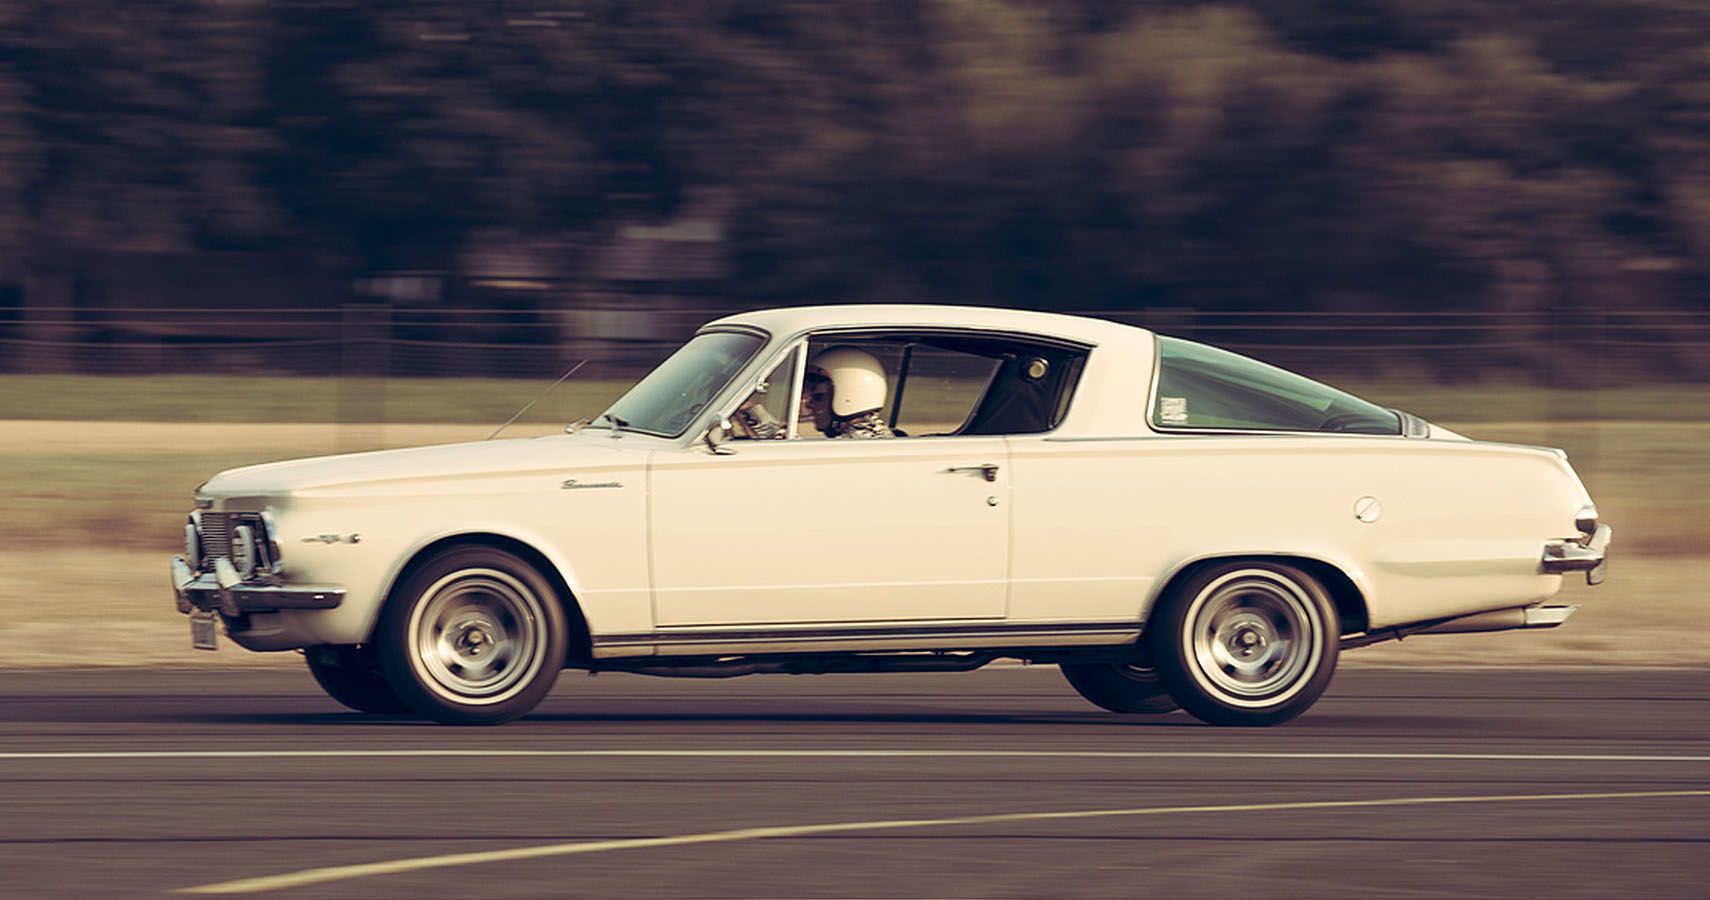 10 Reasons Why You Should Buy The 1965 Plymouth Barracuda